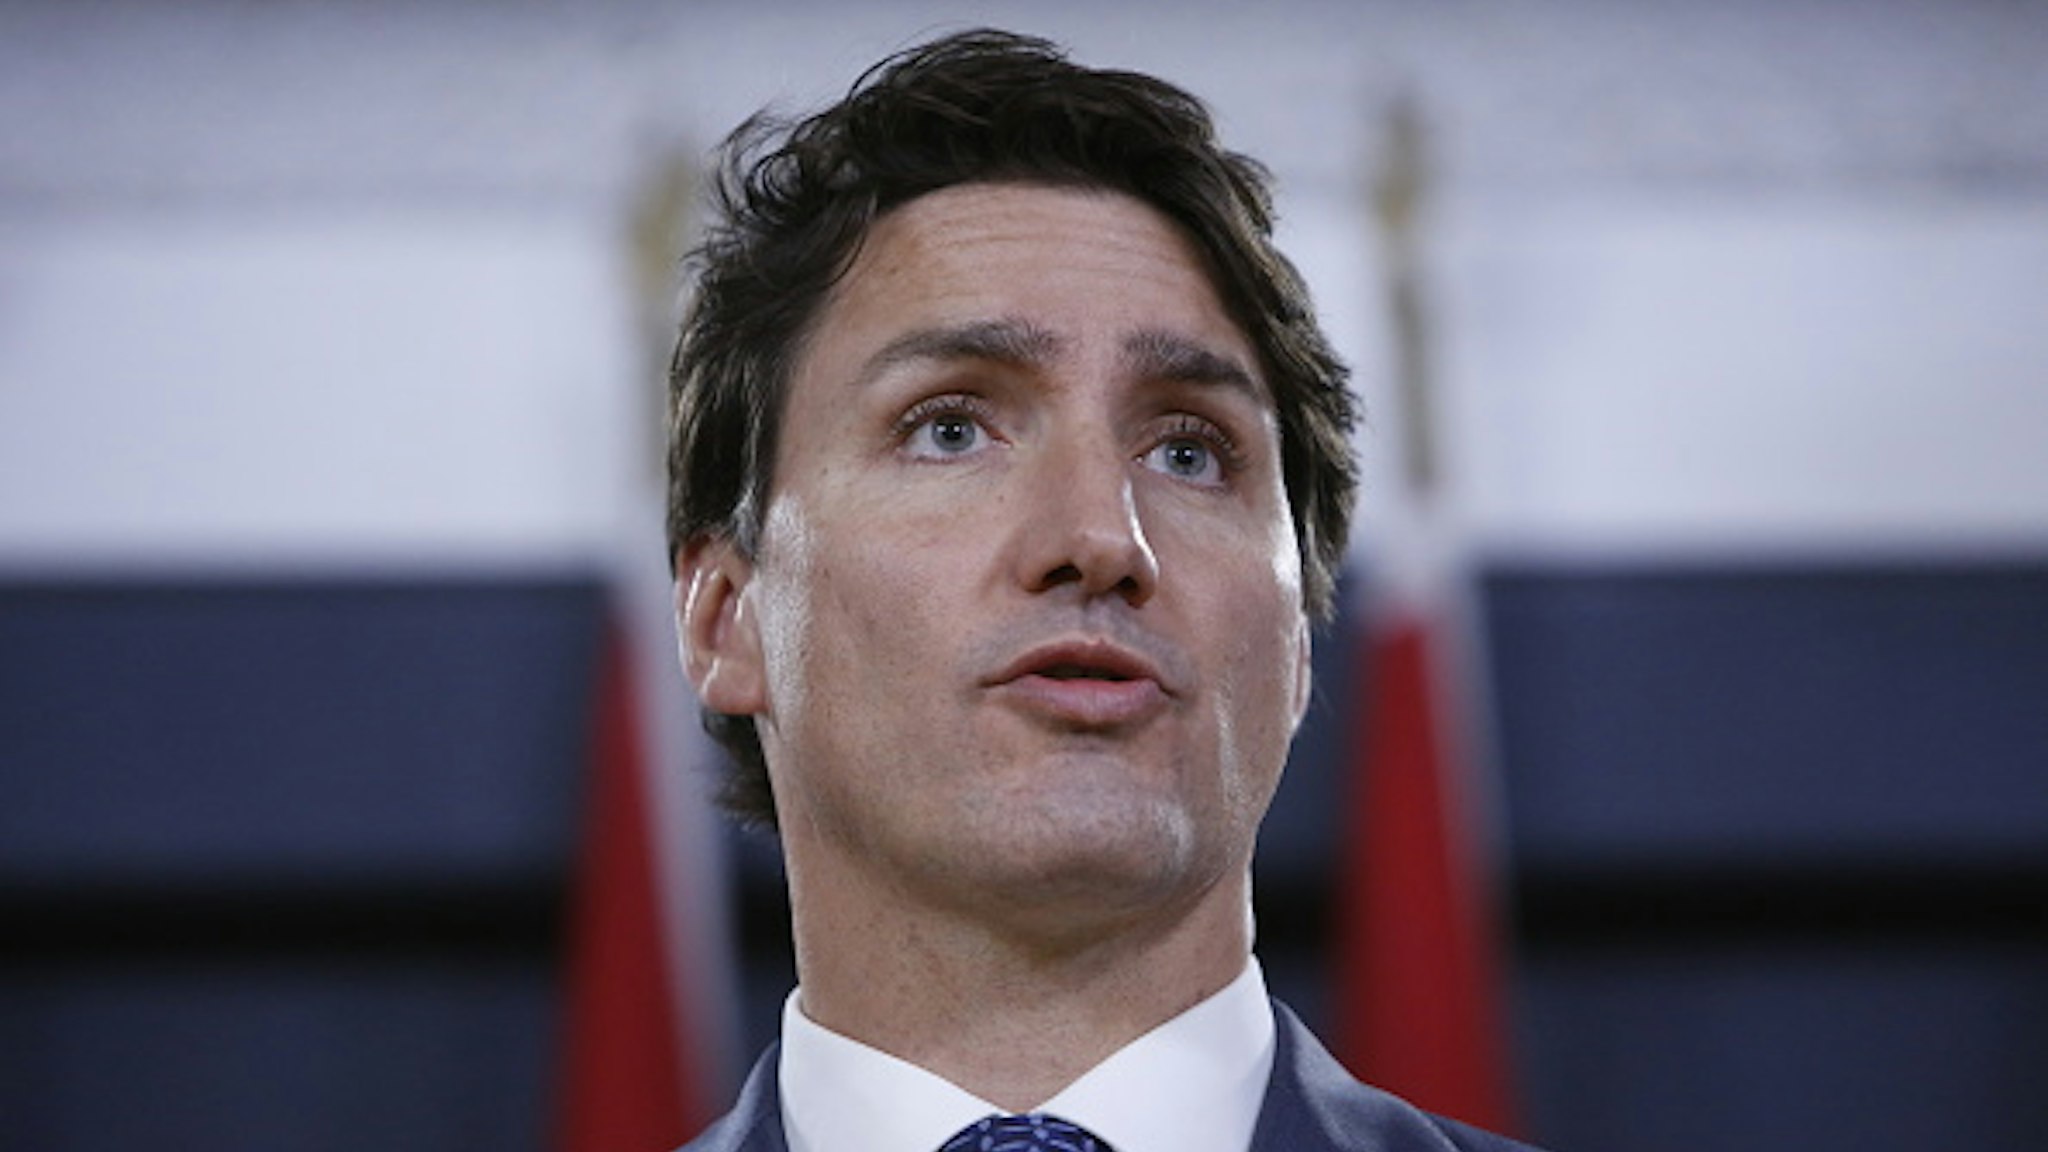 Justin Trudeau, Canada's prime minister, speaks during a news conference in Ottawa, Ontario, Canada, on Wednesday, Oct. 23, 2019. Trudeau, whose Liberals won the most seats in Monday's election but not enough to form a majority, said he had no plans for a formal or informal coalition with any of the smaller parties.